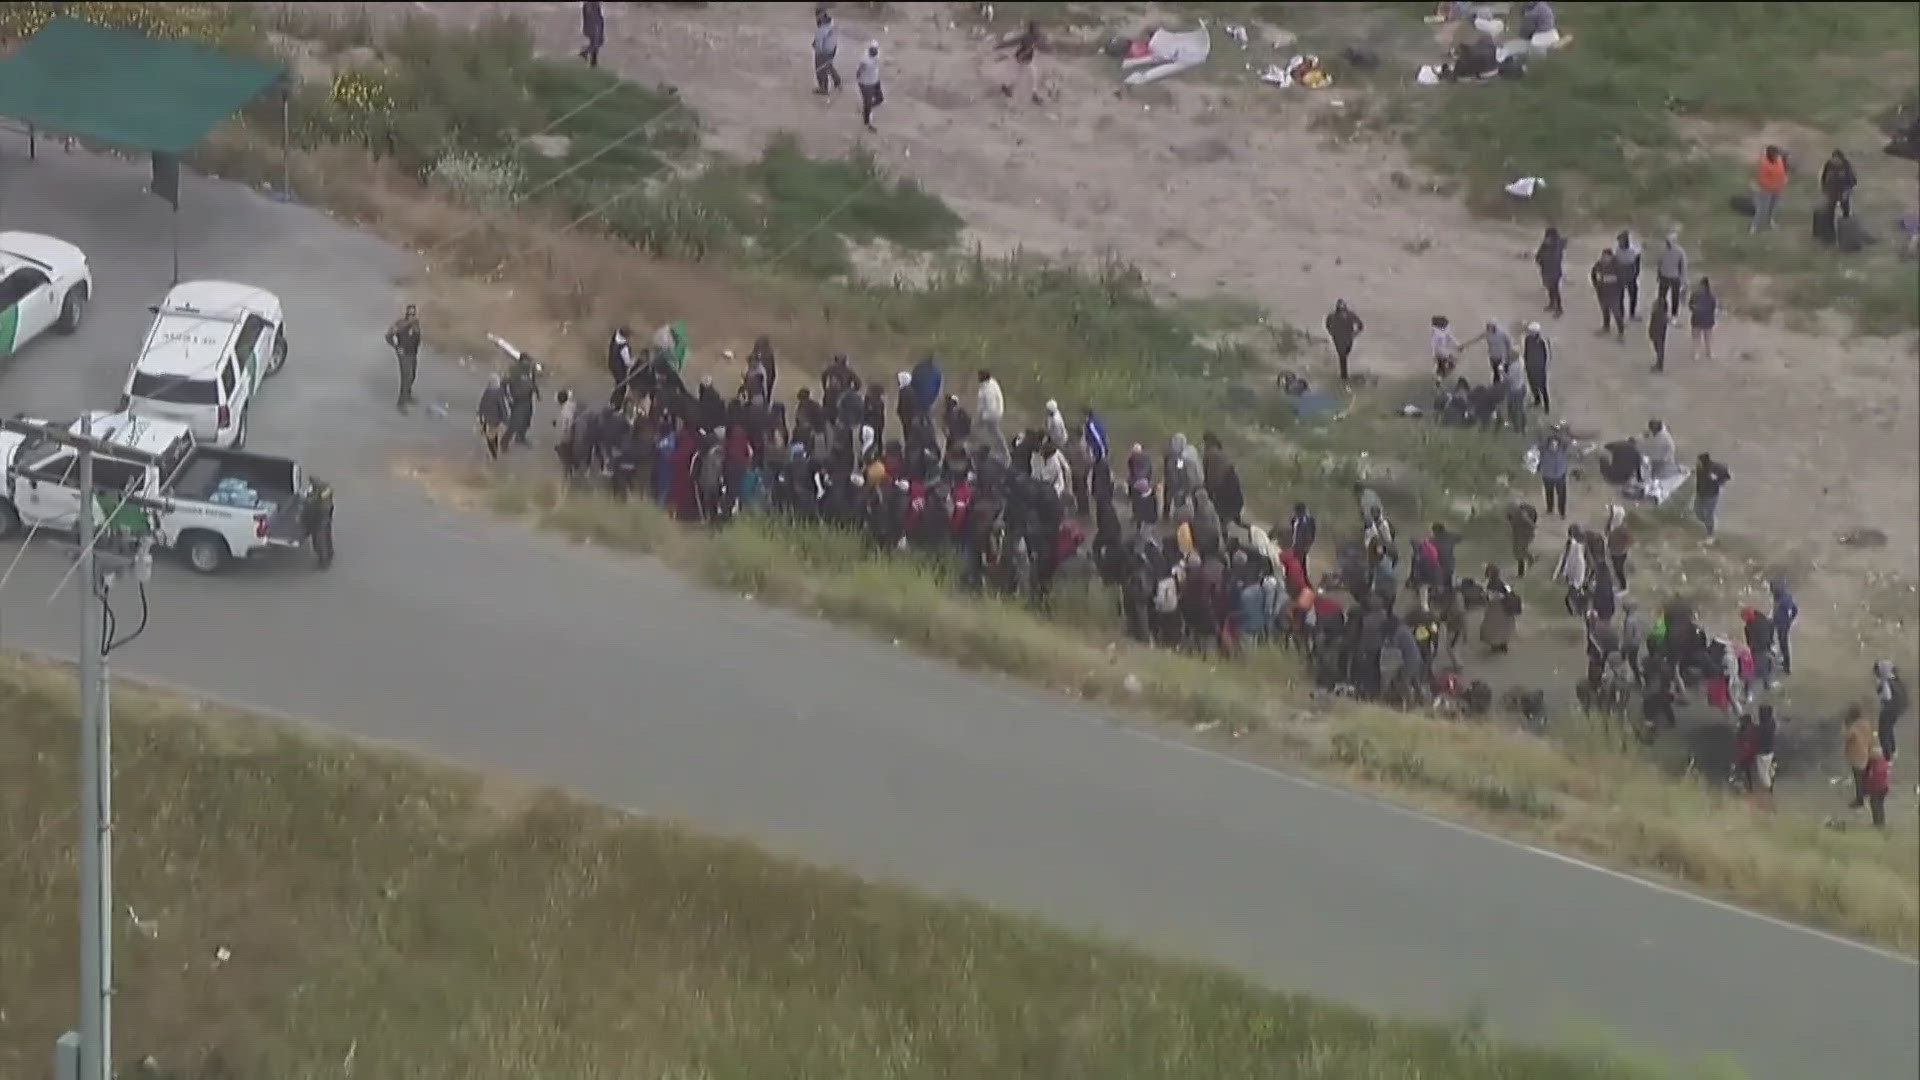 It's estimated more than 10,000 migrants could cross the southern border daily after Title 42 expires on May 11th.